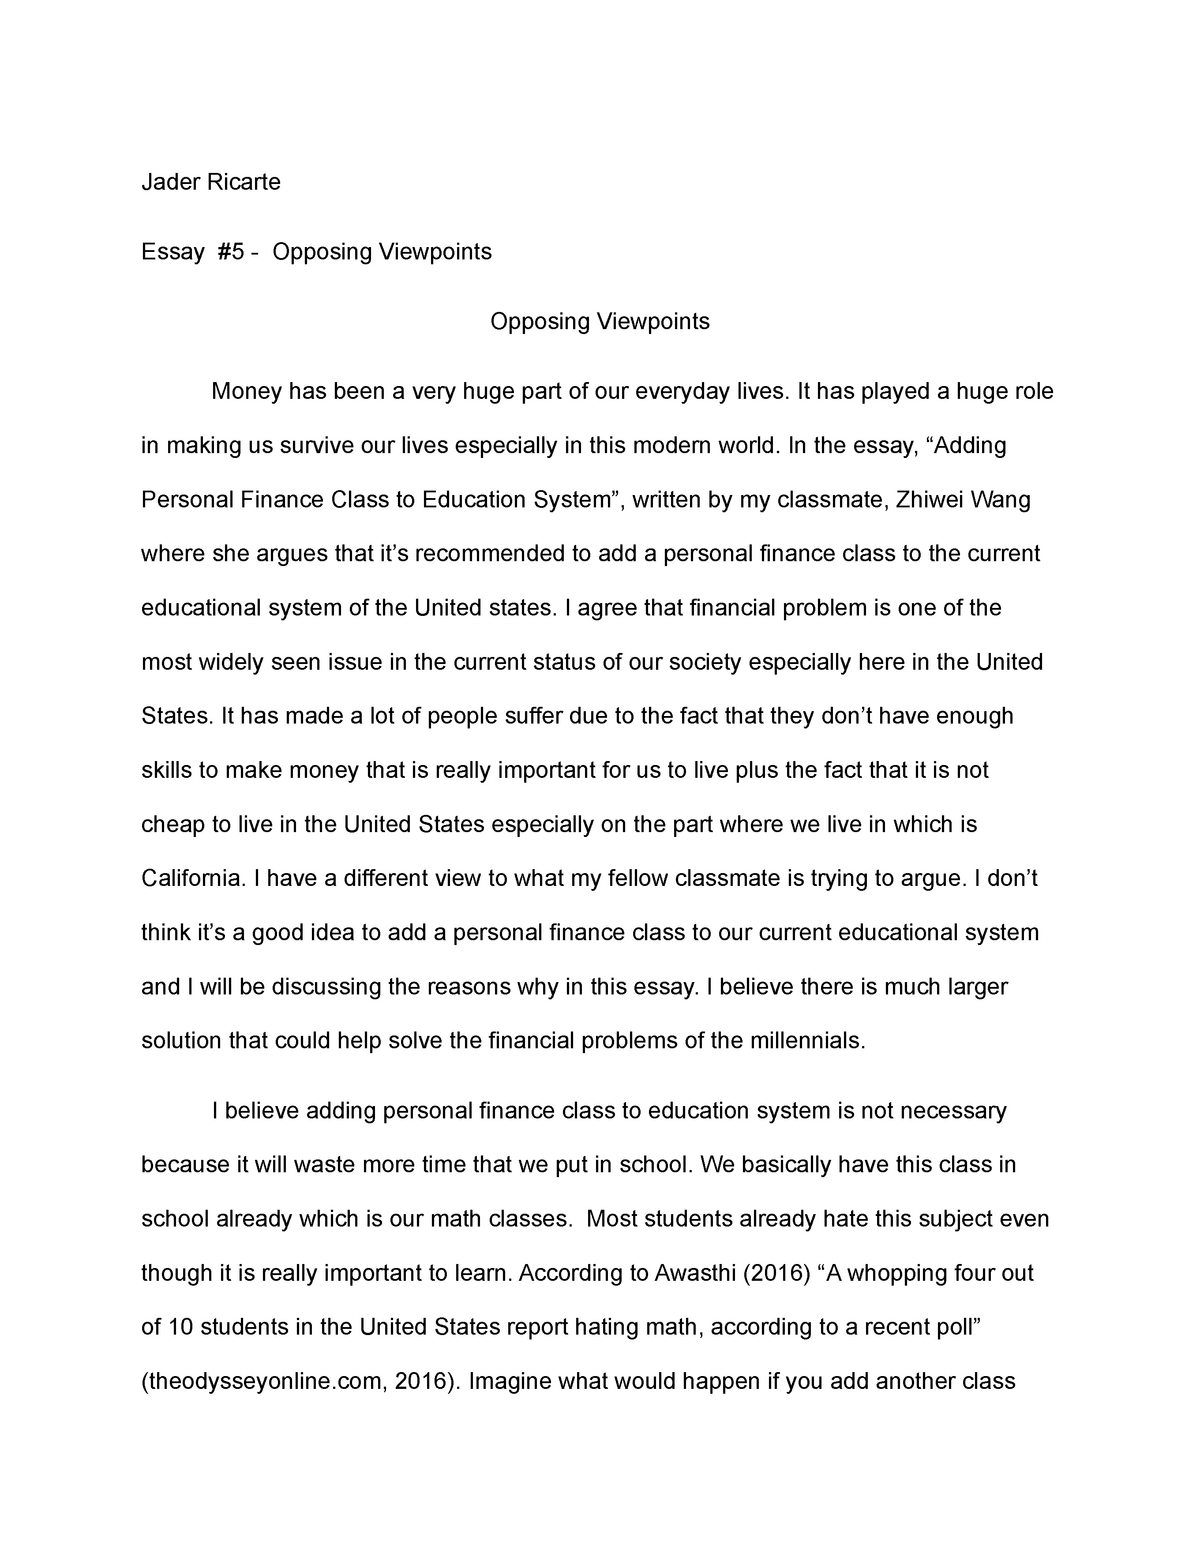 opposing viewpoints essay introduction